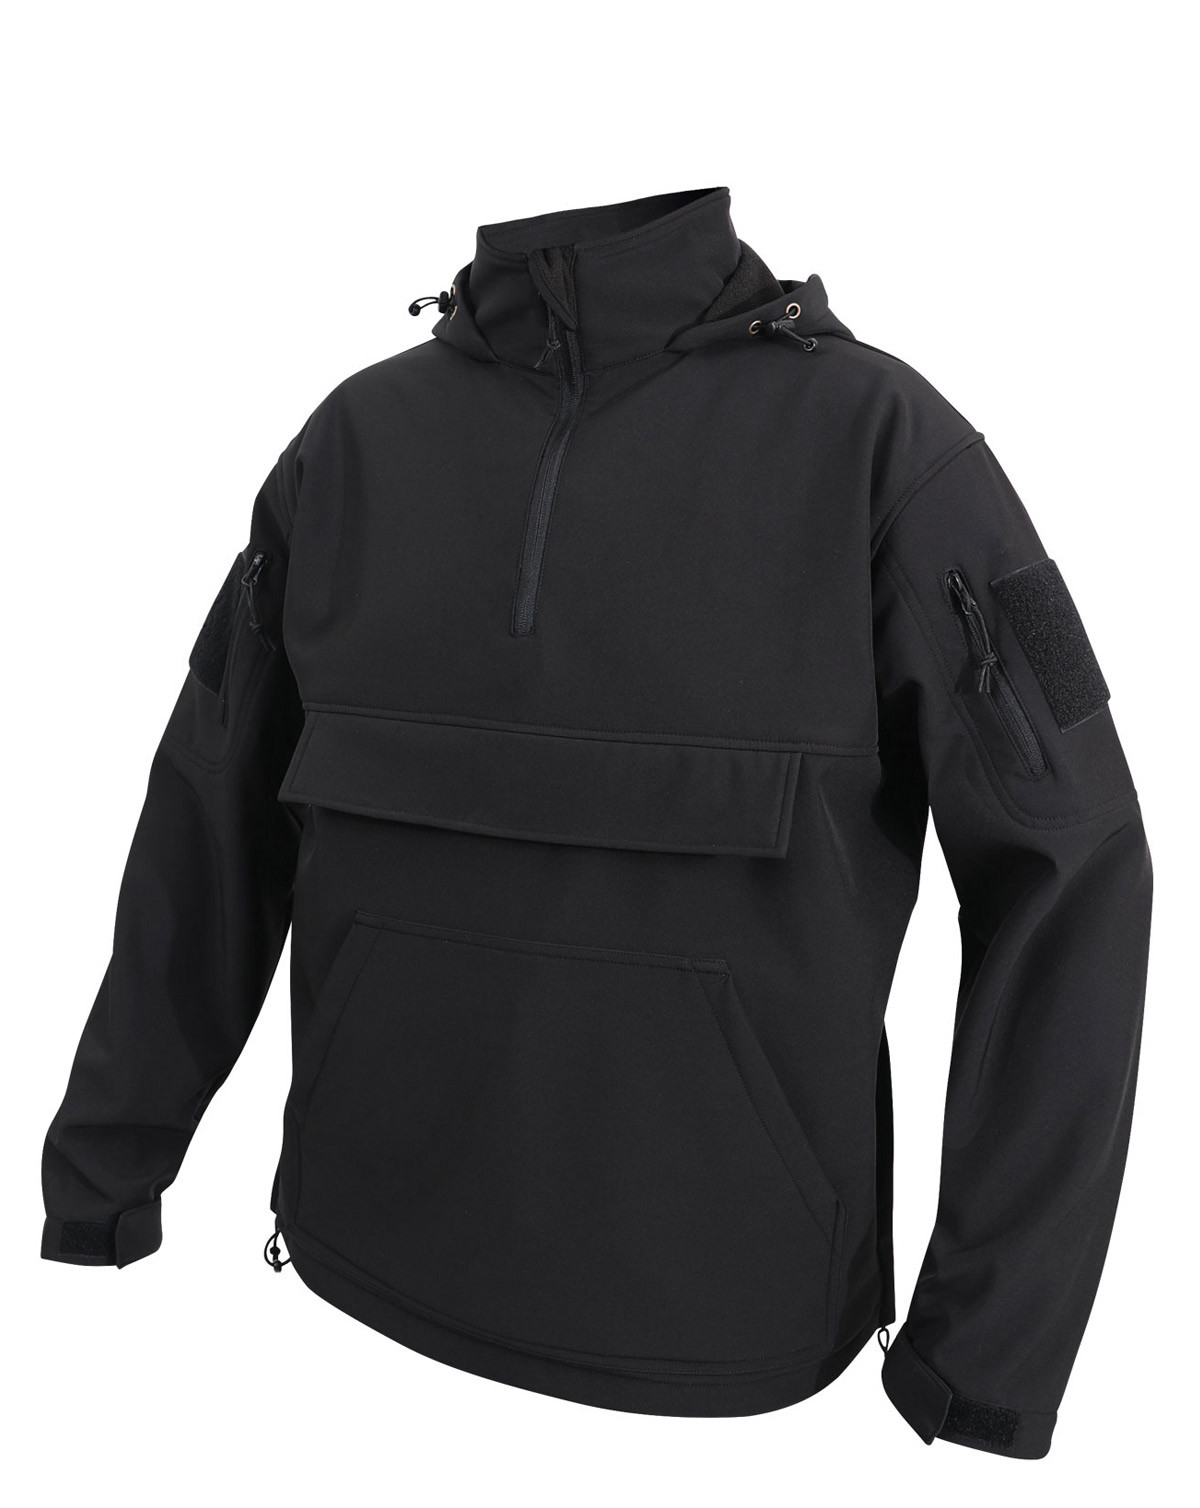 4: Rothco Concealed Carry Soft Shell Anorak (Sort, 3XL)